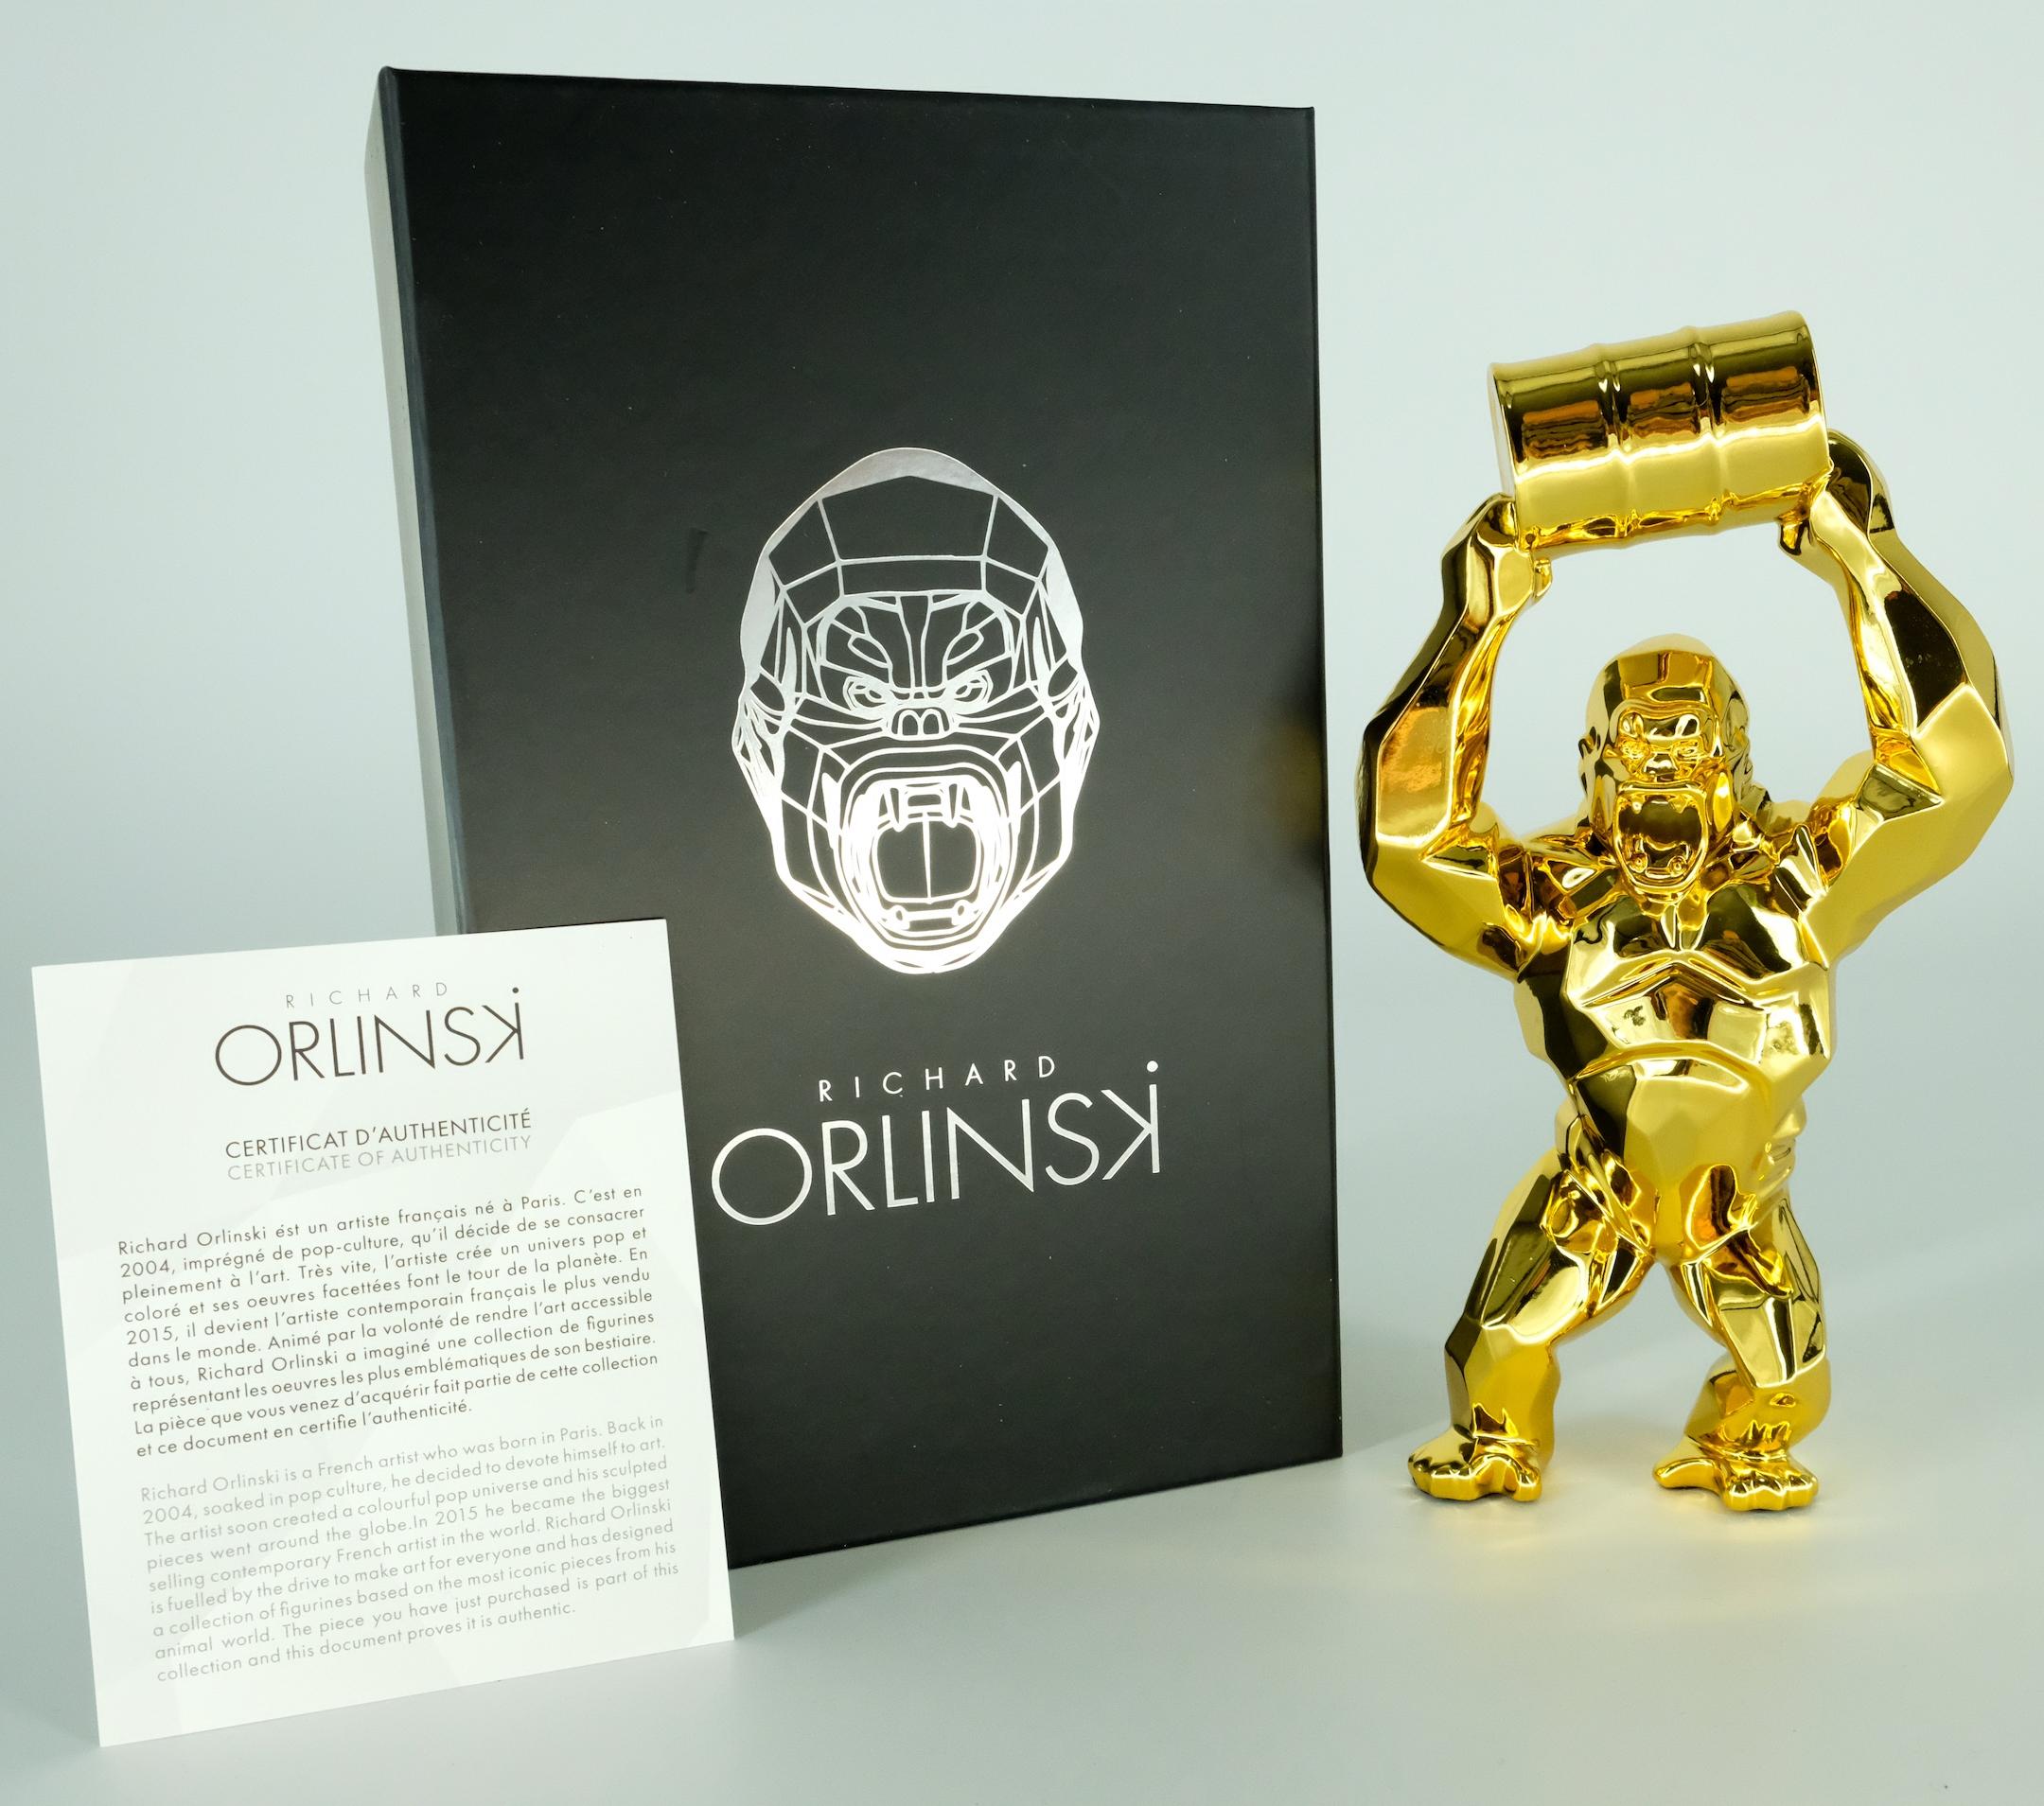 Richard ORLINSKI
Kong Oil Spirit (Gold edition)

Sculpture in resin
Metallic Gold
About 18 x 10 cm (c. 7 x 4 in)
Presented in original box with certificate

Excellent condition